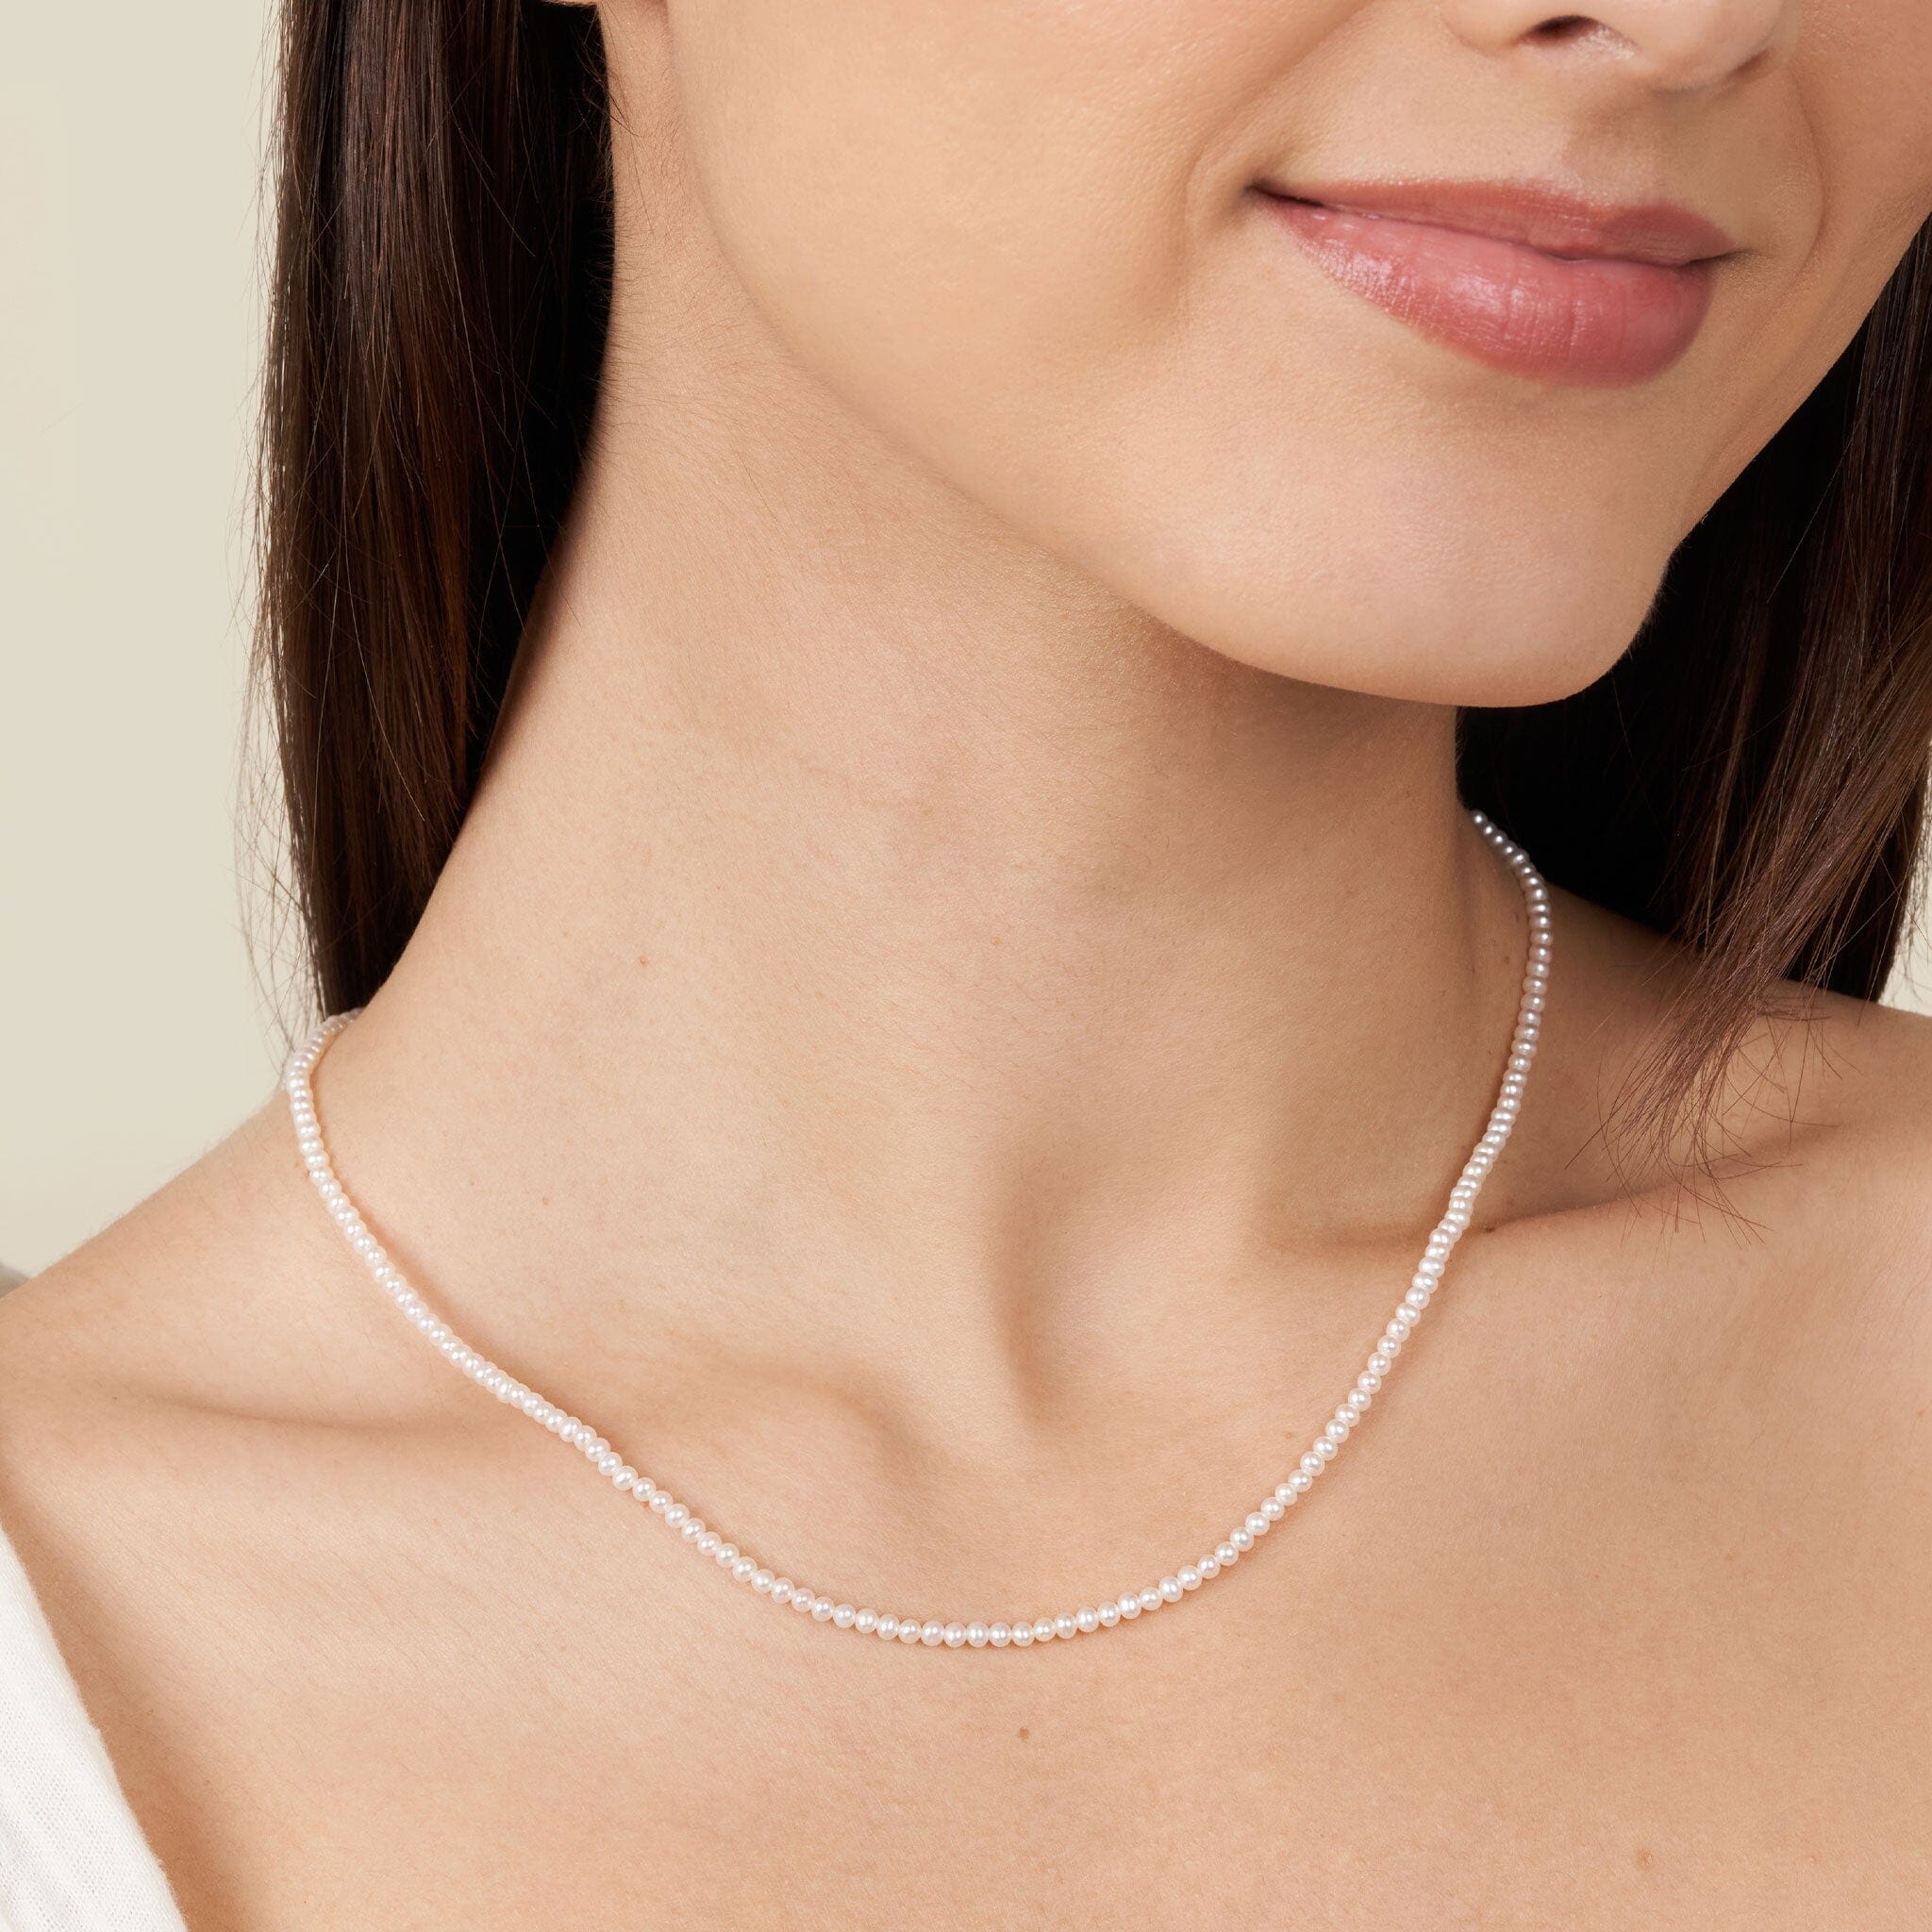 2.5-3.0 mm AAA Freshwater Pearl Necklace - 18 Inch on model